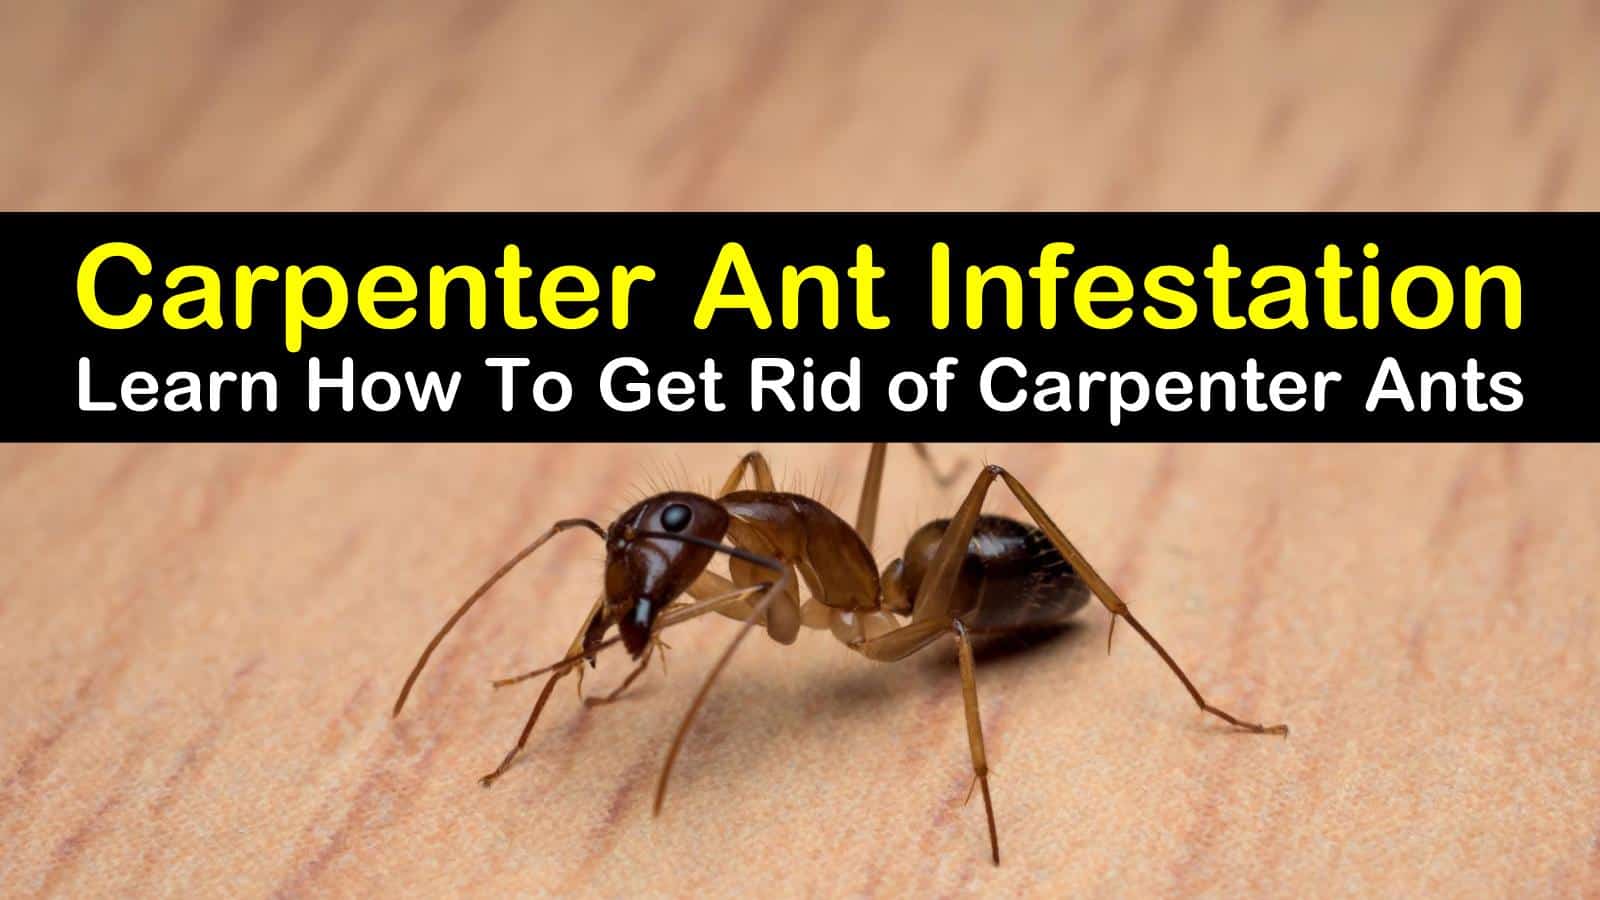 how to get rid of carpenter ants titleimg1